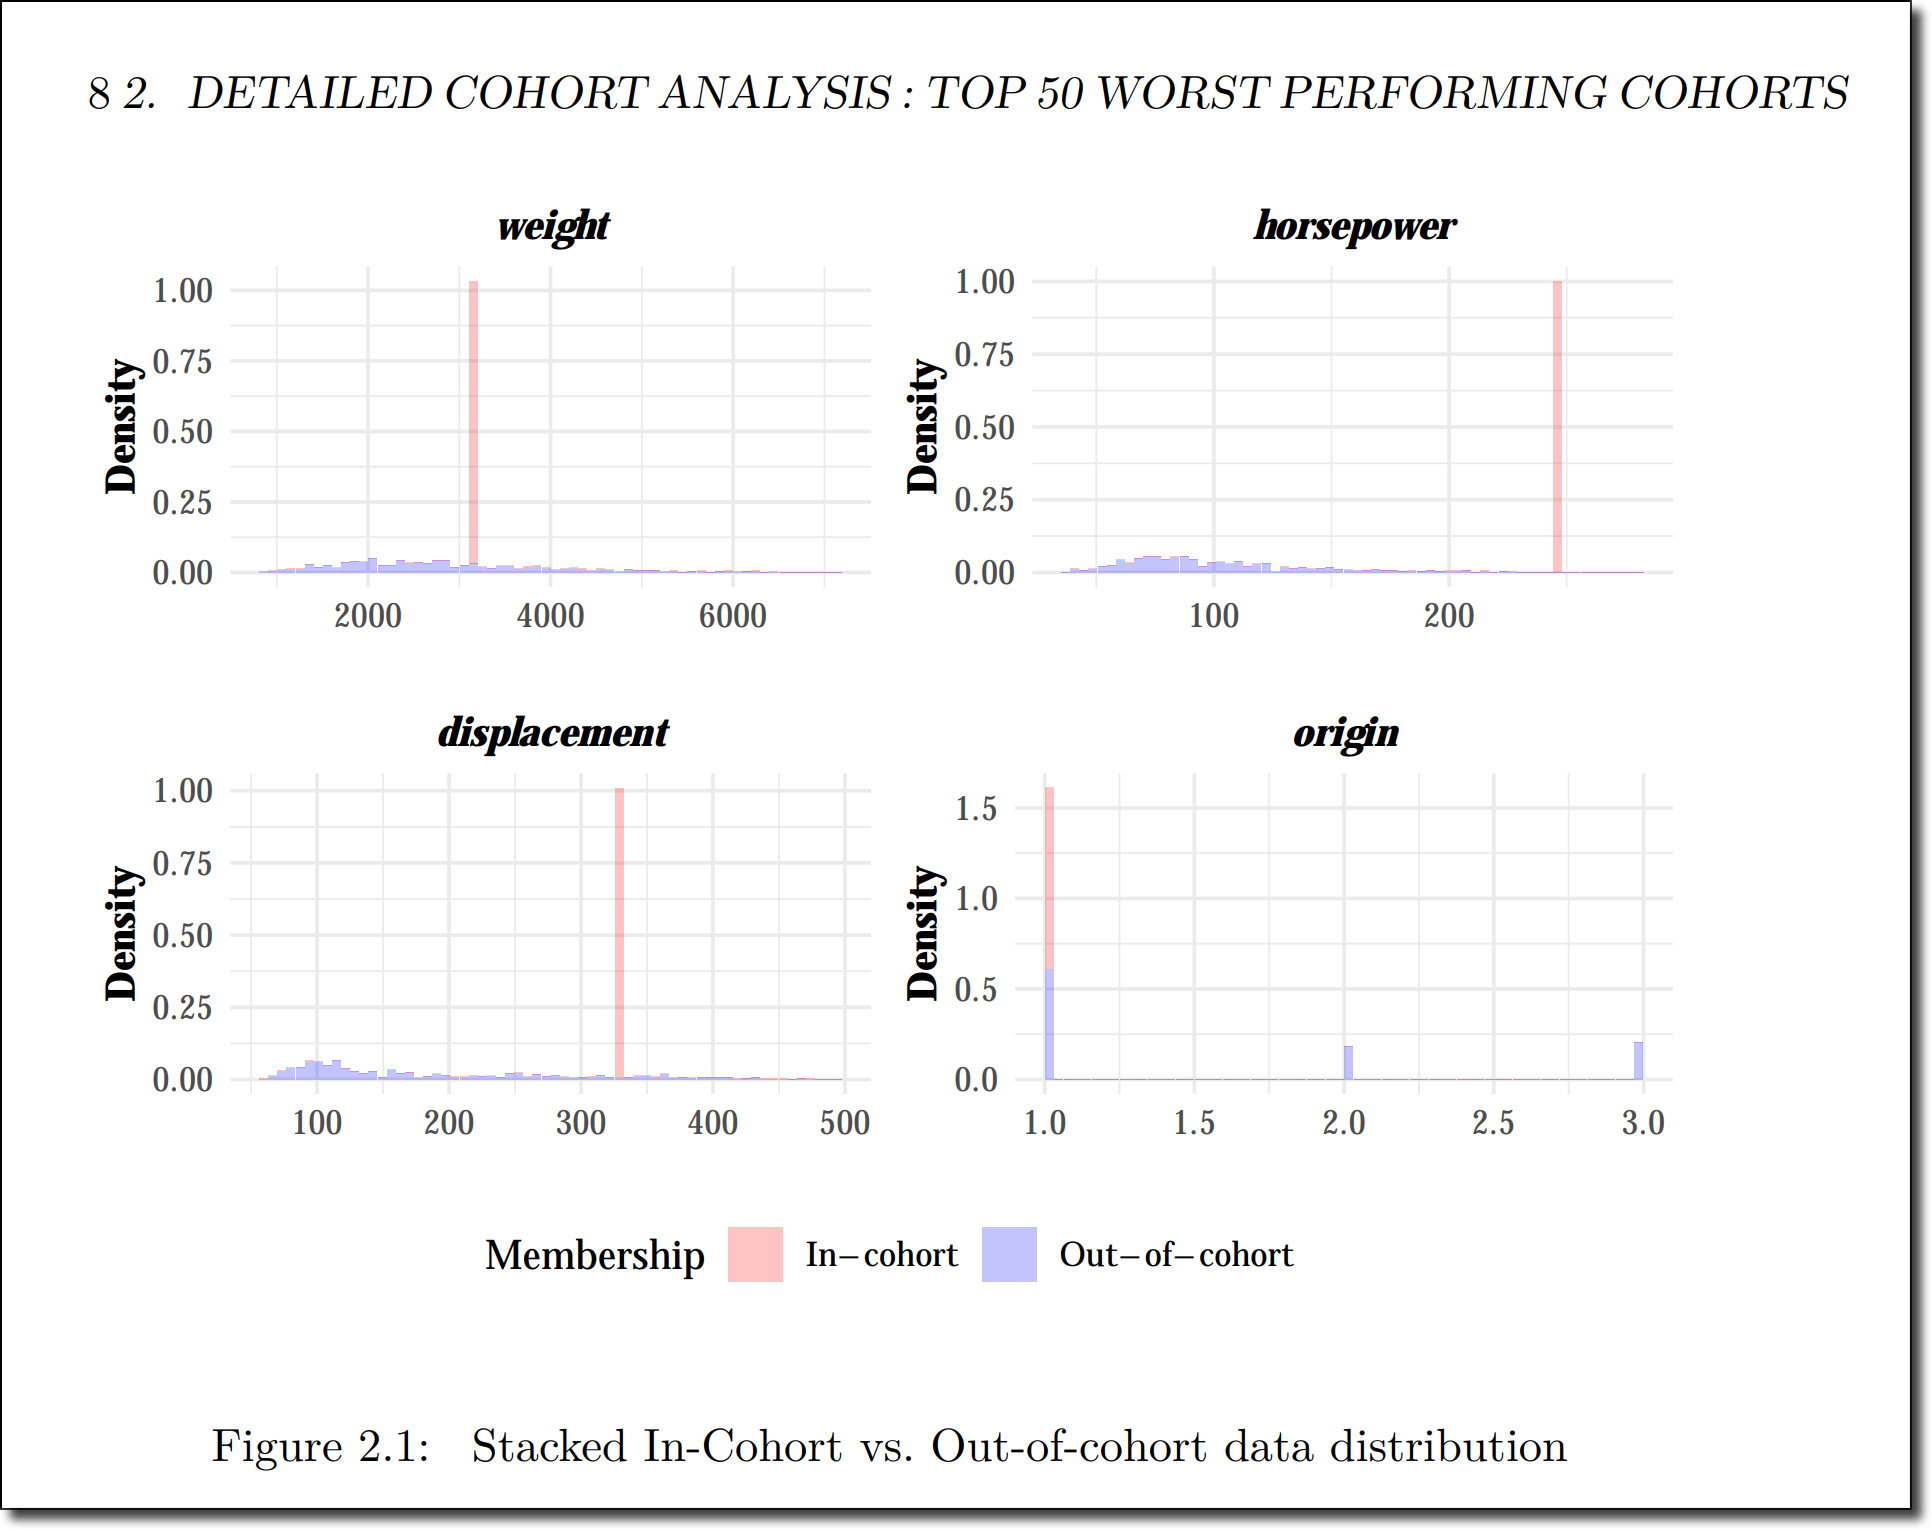 The detailed cohort analysis shows the top 50 worst performing cohorts.